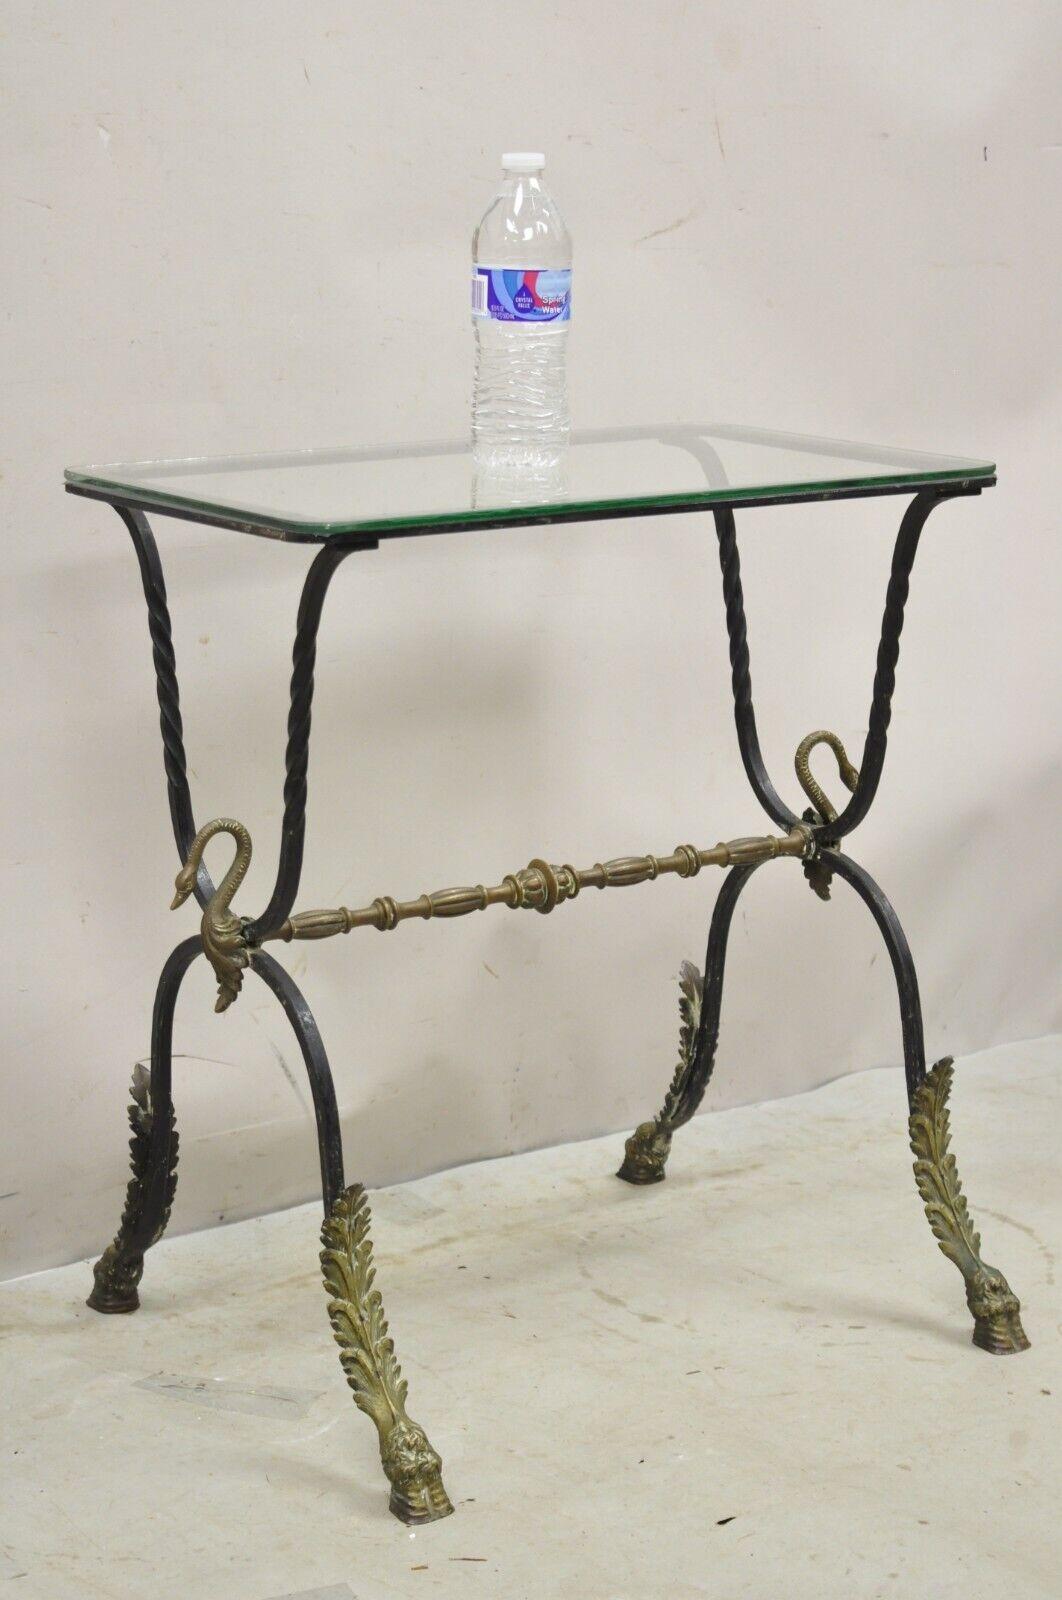 Antique Italian Regency Neoclassical Wrought Iron and Bronze Swan Side Table. Item featured is a nice small size, bronze swans and hoof, glass top, very nice antique item. Circa  Late 19th Century. Measurements: 23.5